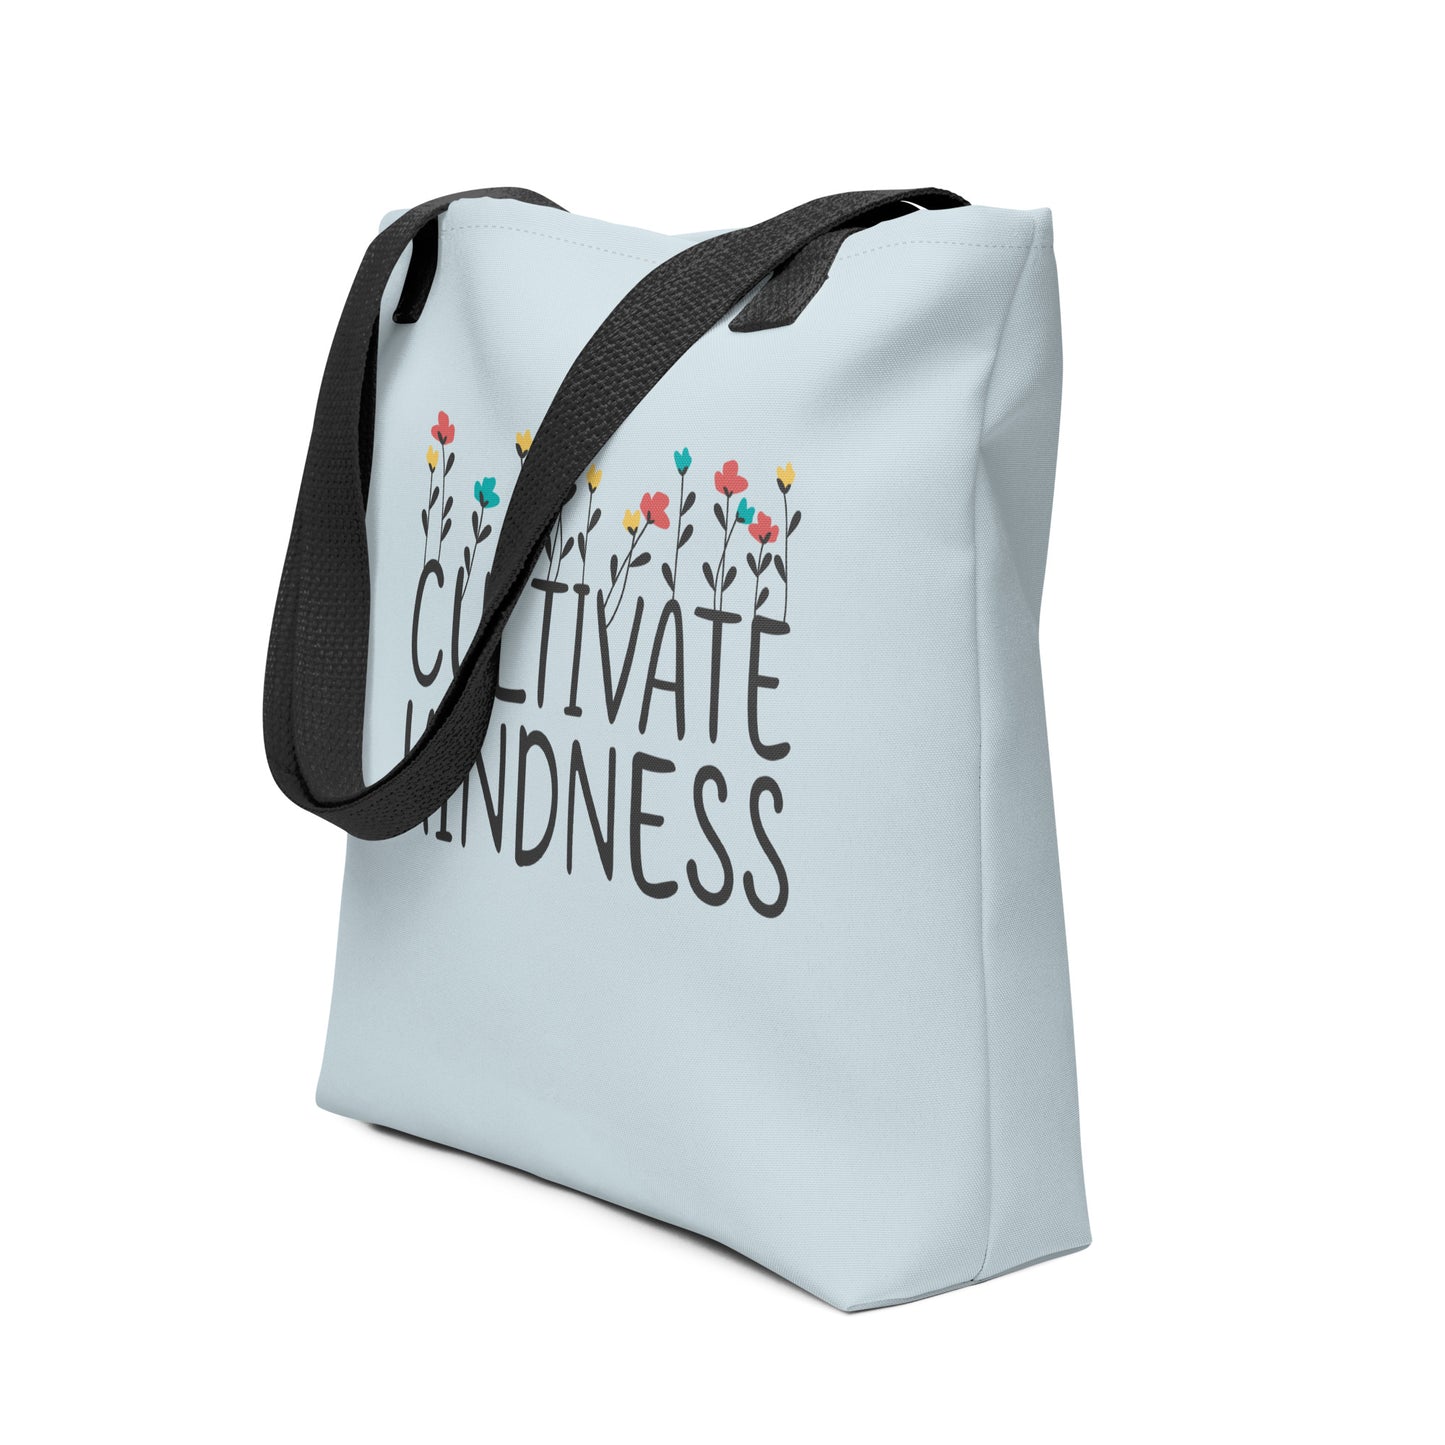 Cultivate Kindness | Tote